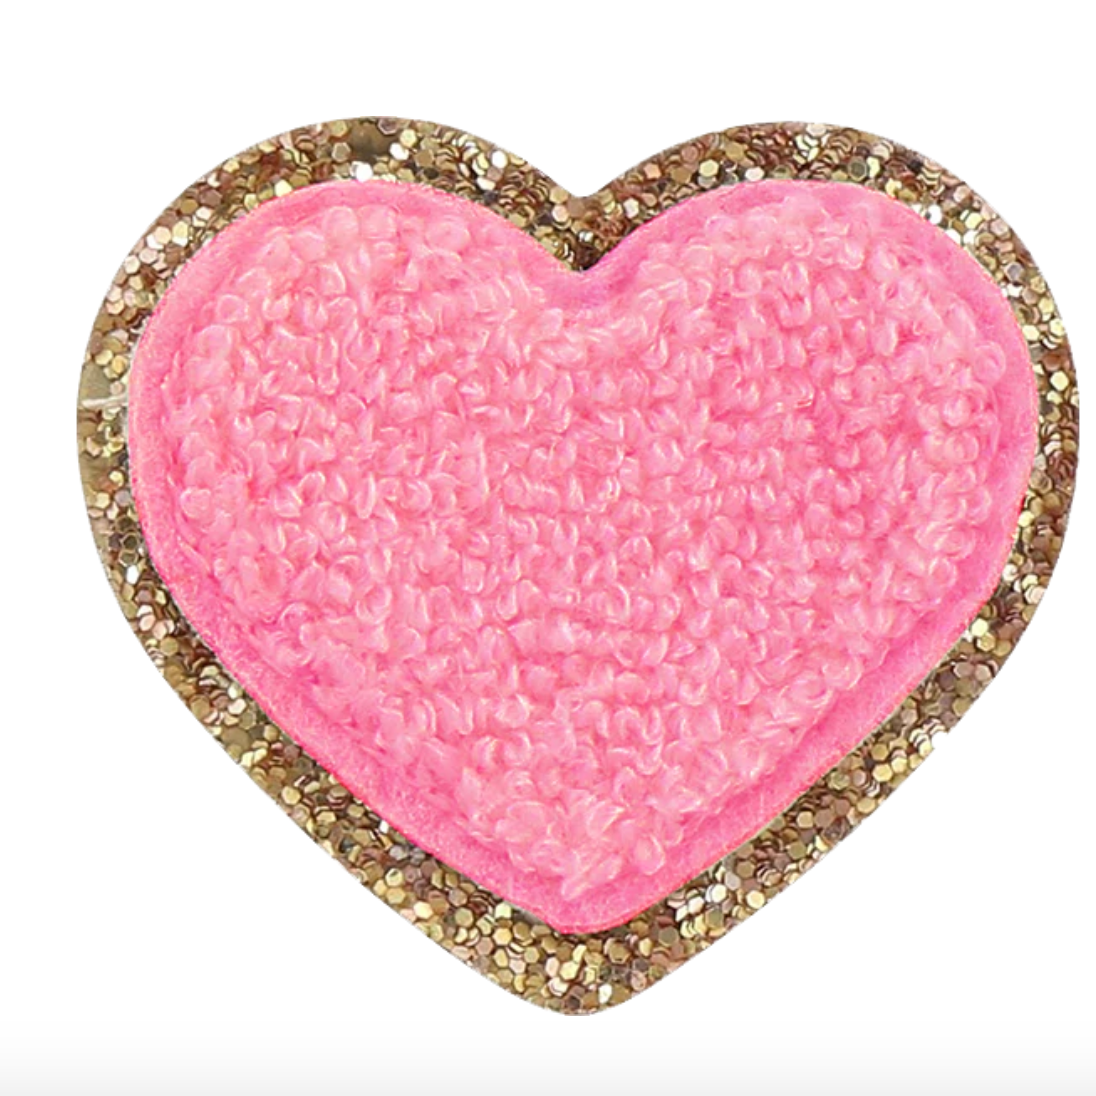 Stoney Clover Ln Glitter Heart Patches - Multiple Colors Available